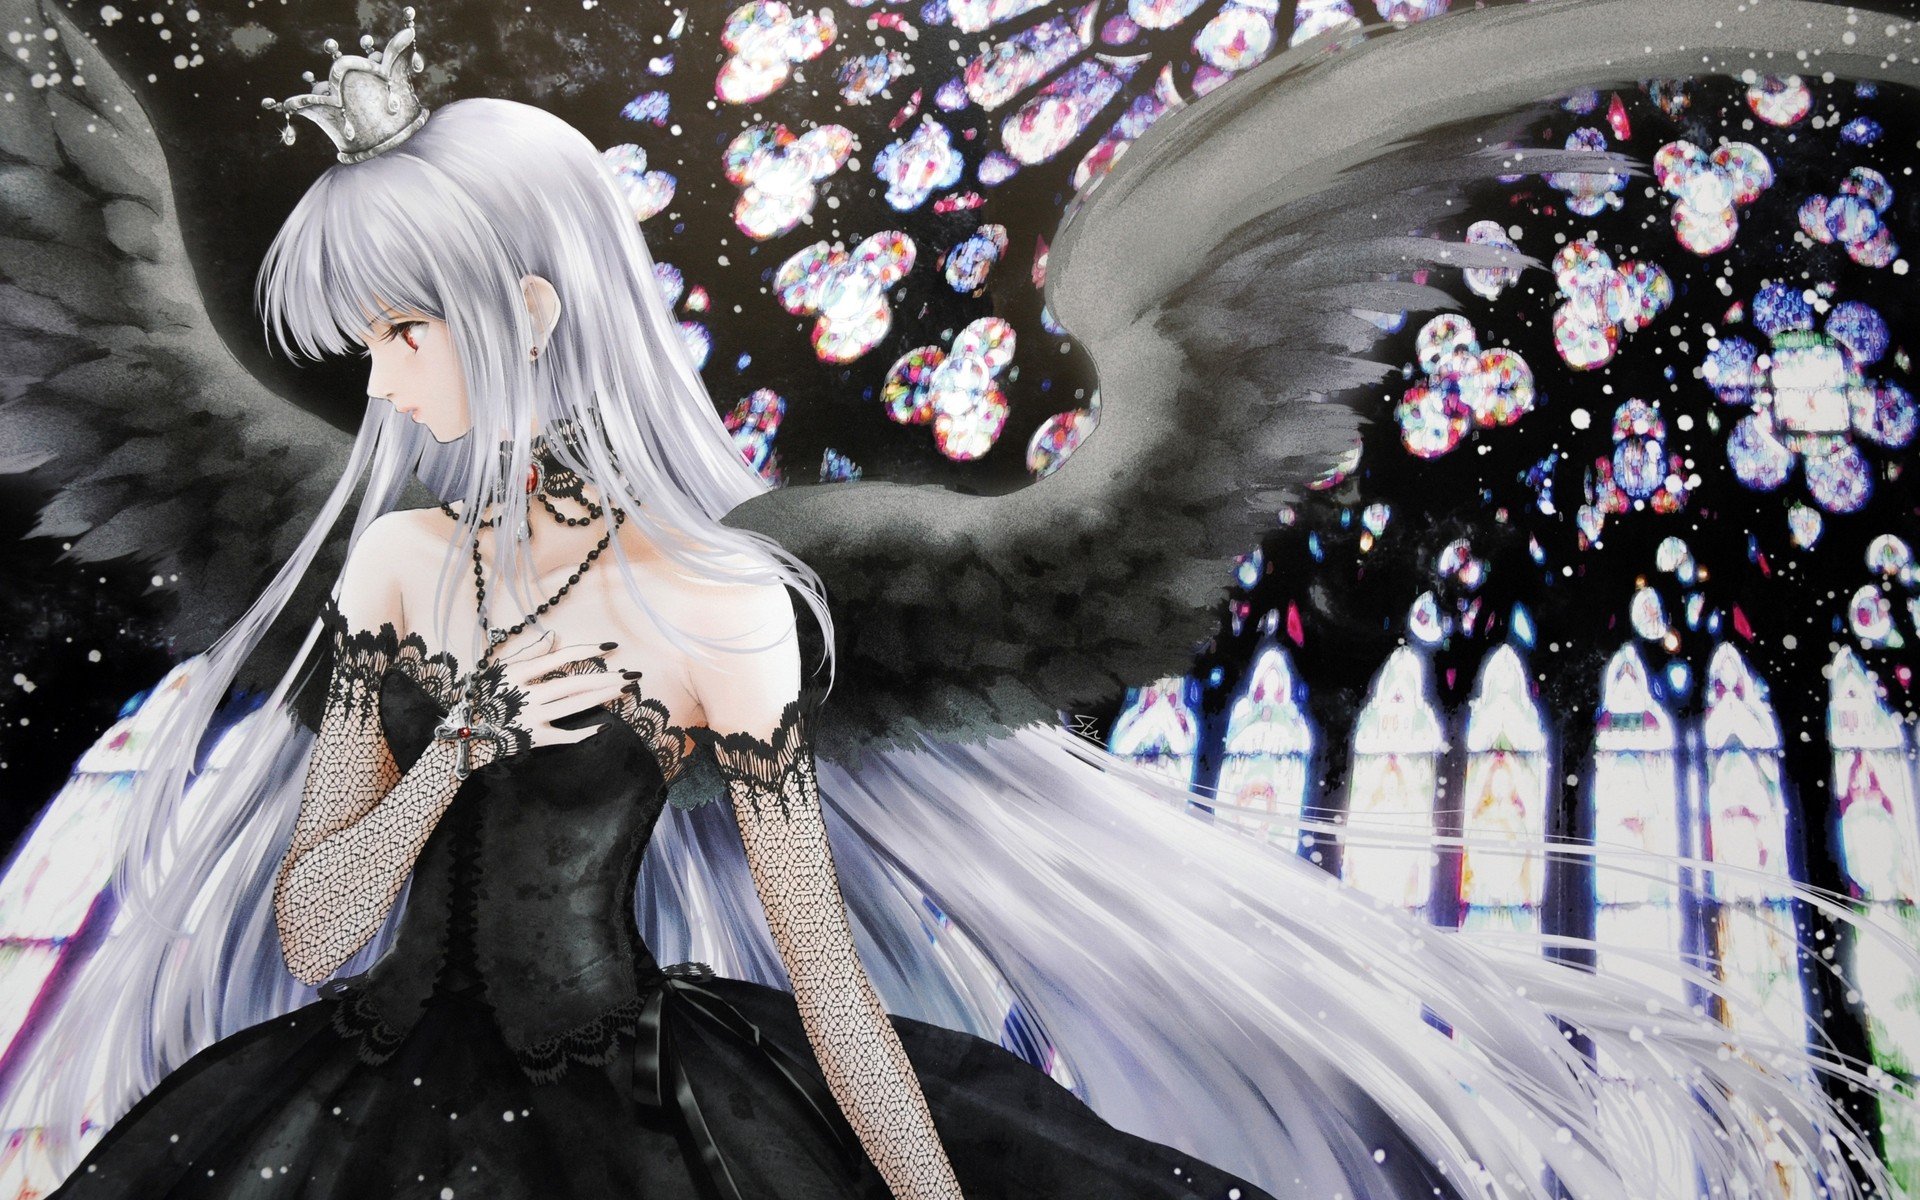 black, Lights, Long, Hair, Gothic, Red, Eyes, Necklaces, Crowns, Gothic, Dress, Angel, Wings, Anime, Girls, Silver, Hair, Black, Nail, Polish, Looking, Away Wallpaper